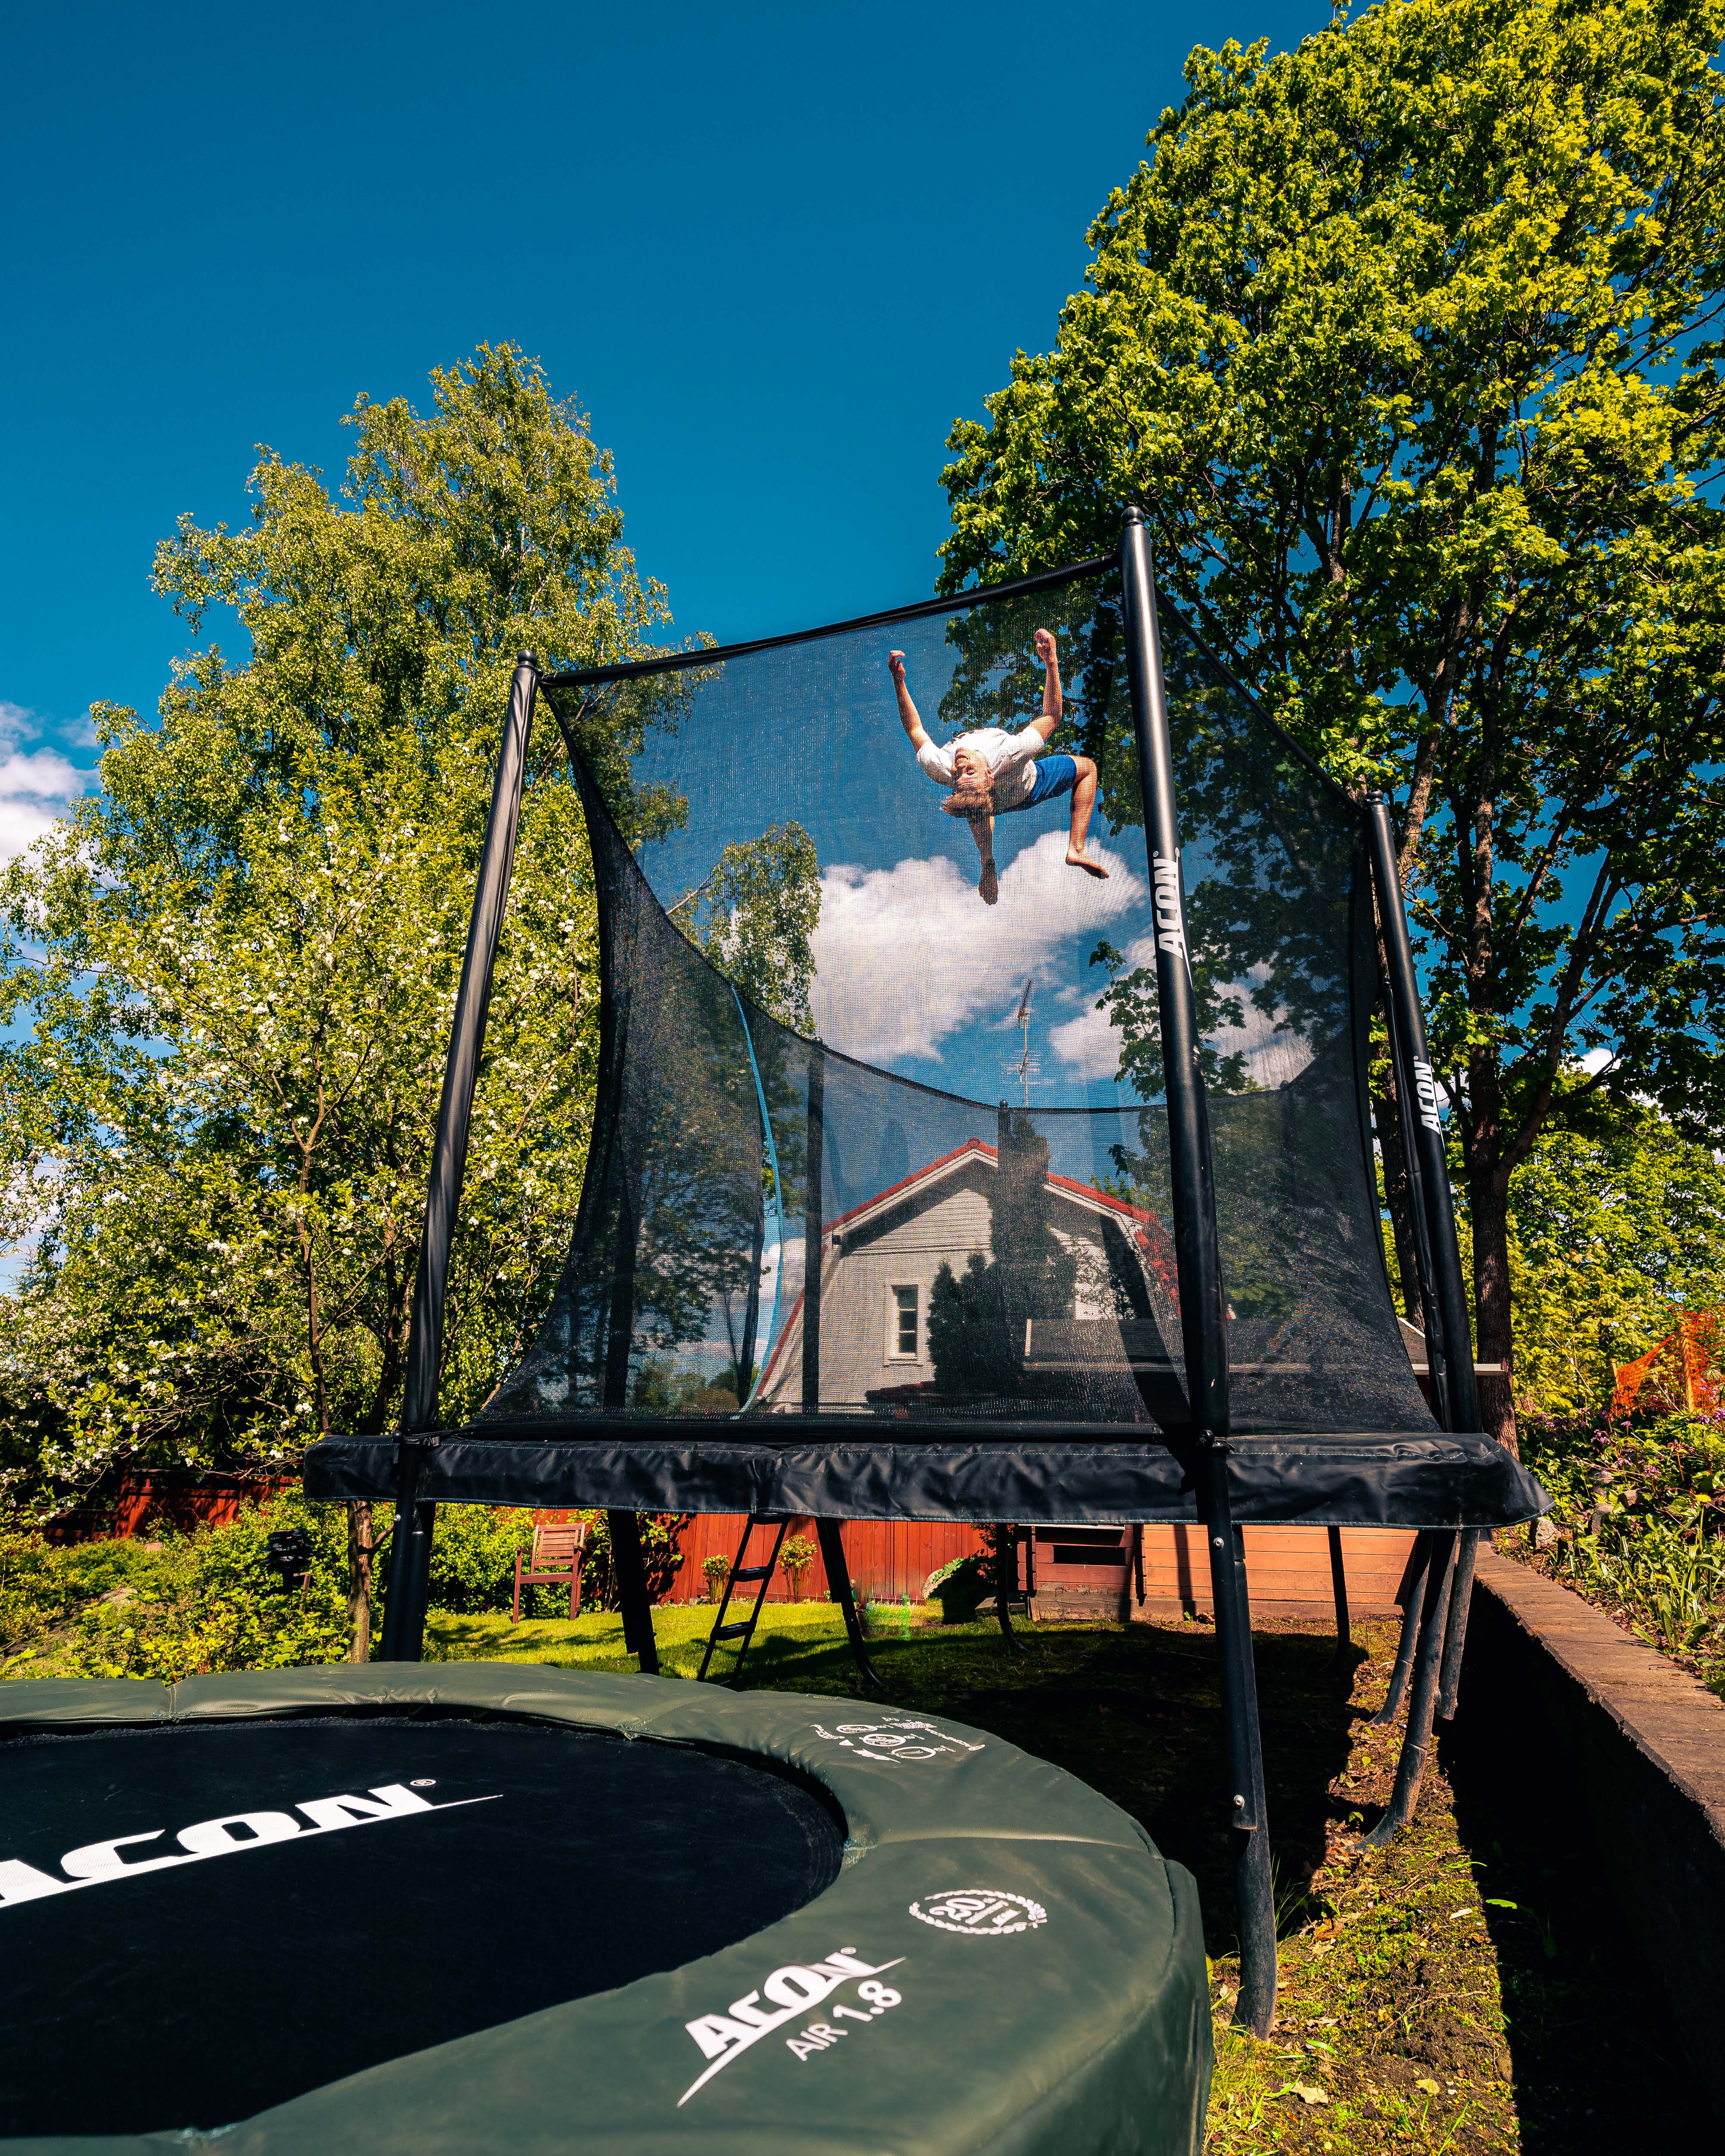 A guy doing a backflip on an ACON rectangular trampoline with net